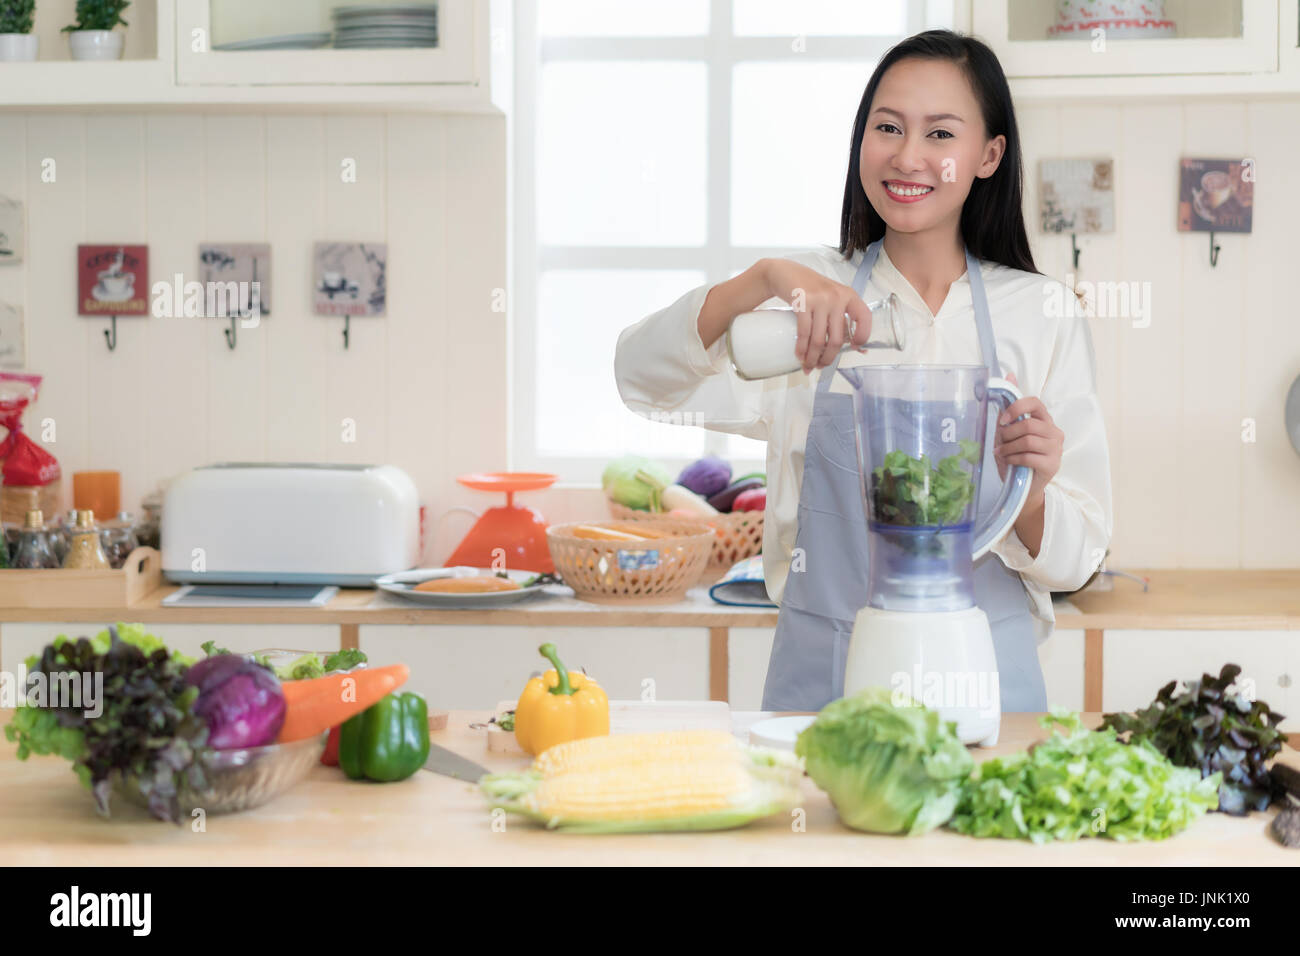 Vegetable smoothie. Asian woman making green smoothies with blender home in kitchen. Healthy raw eating lifestyle concept portrait of beautiful young  Stock Photo